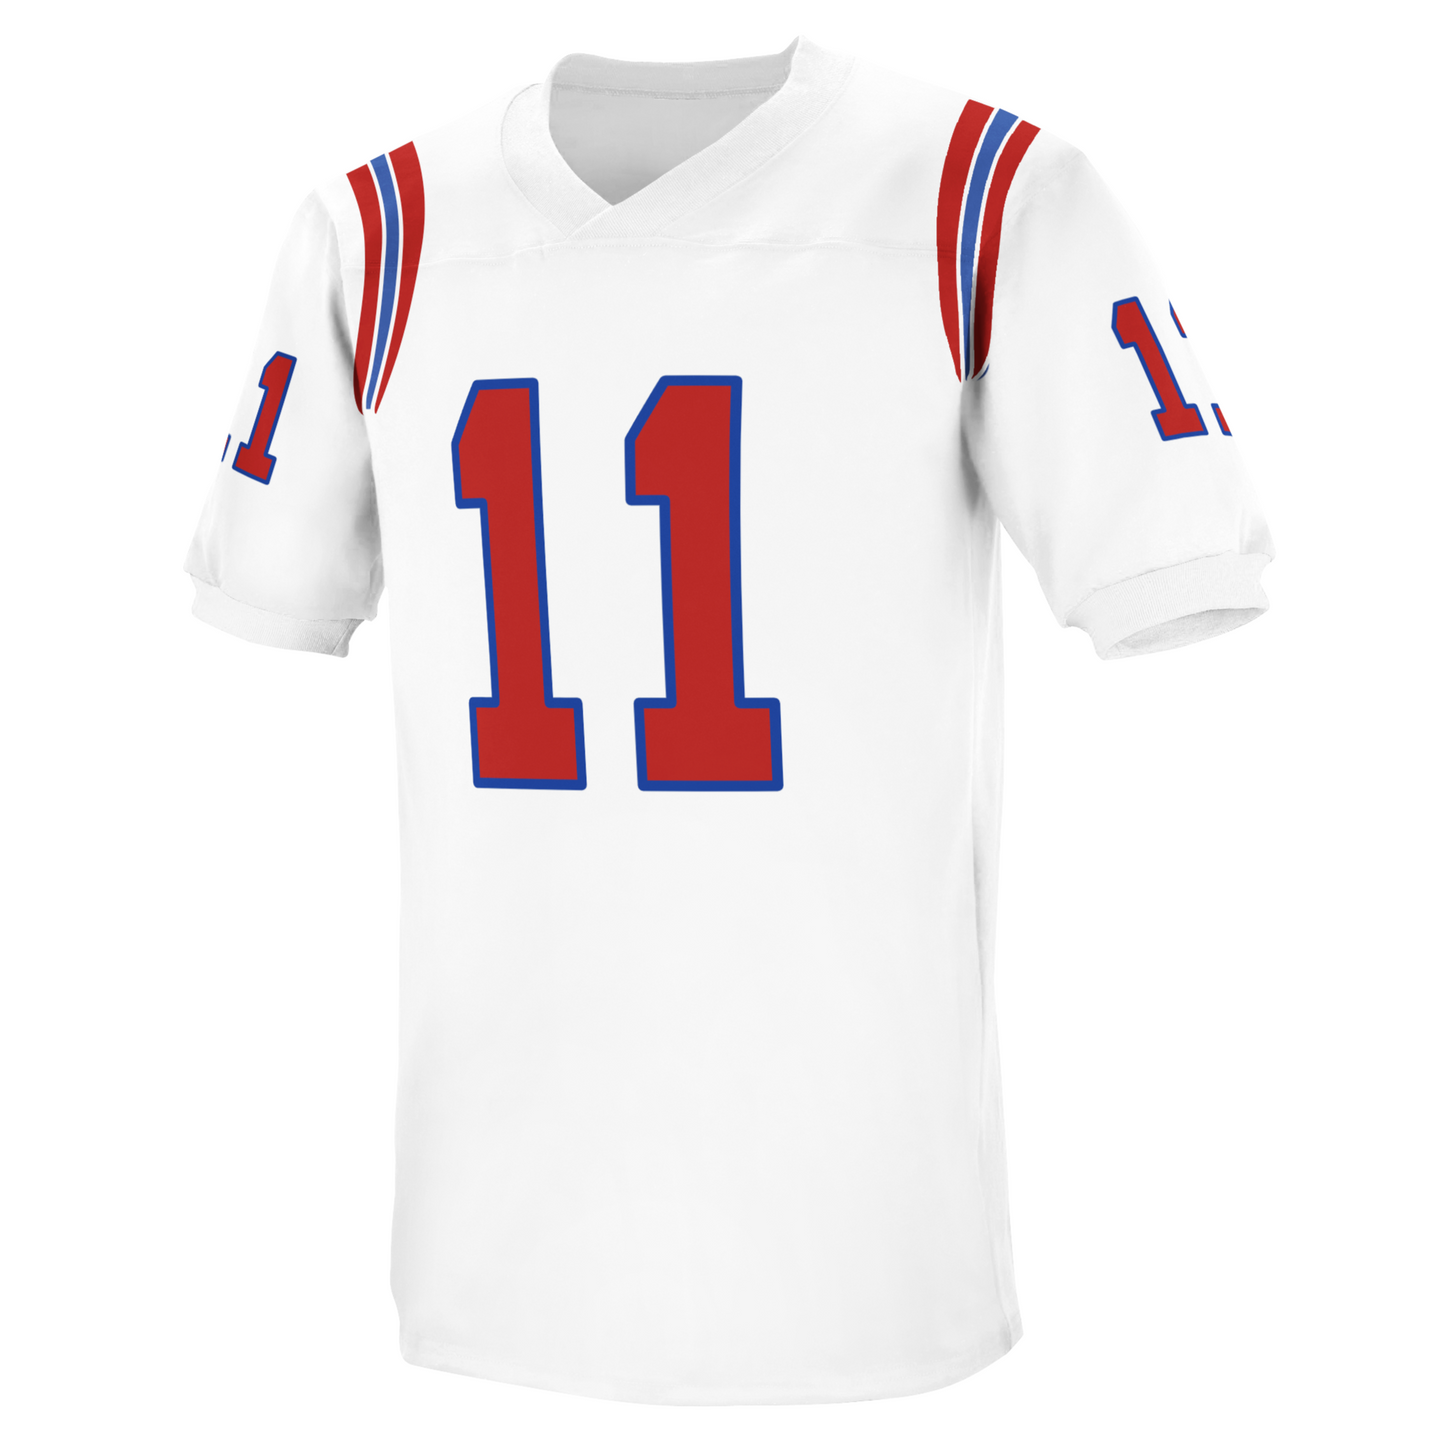 New England Colonials Jersey